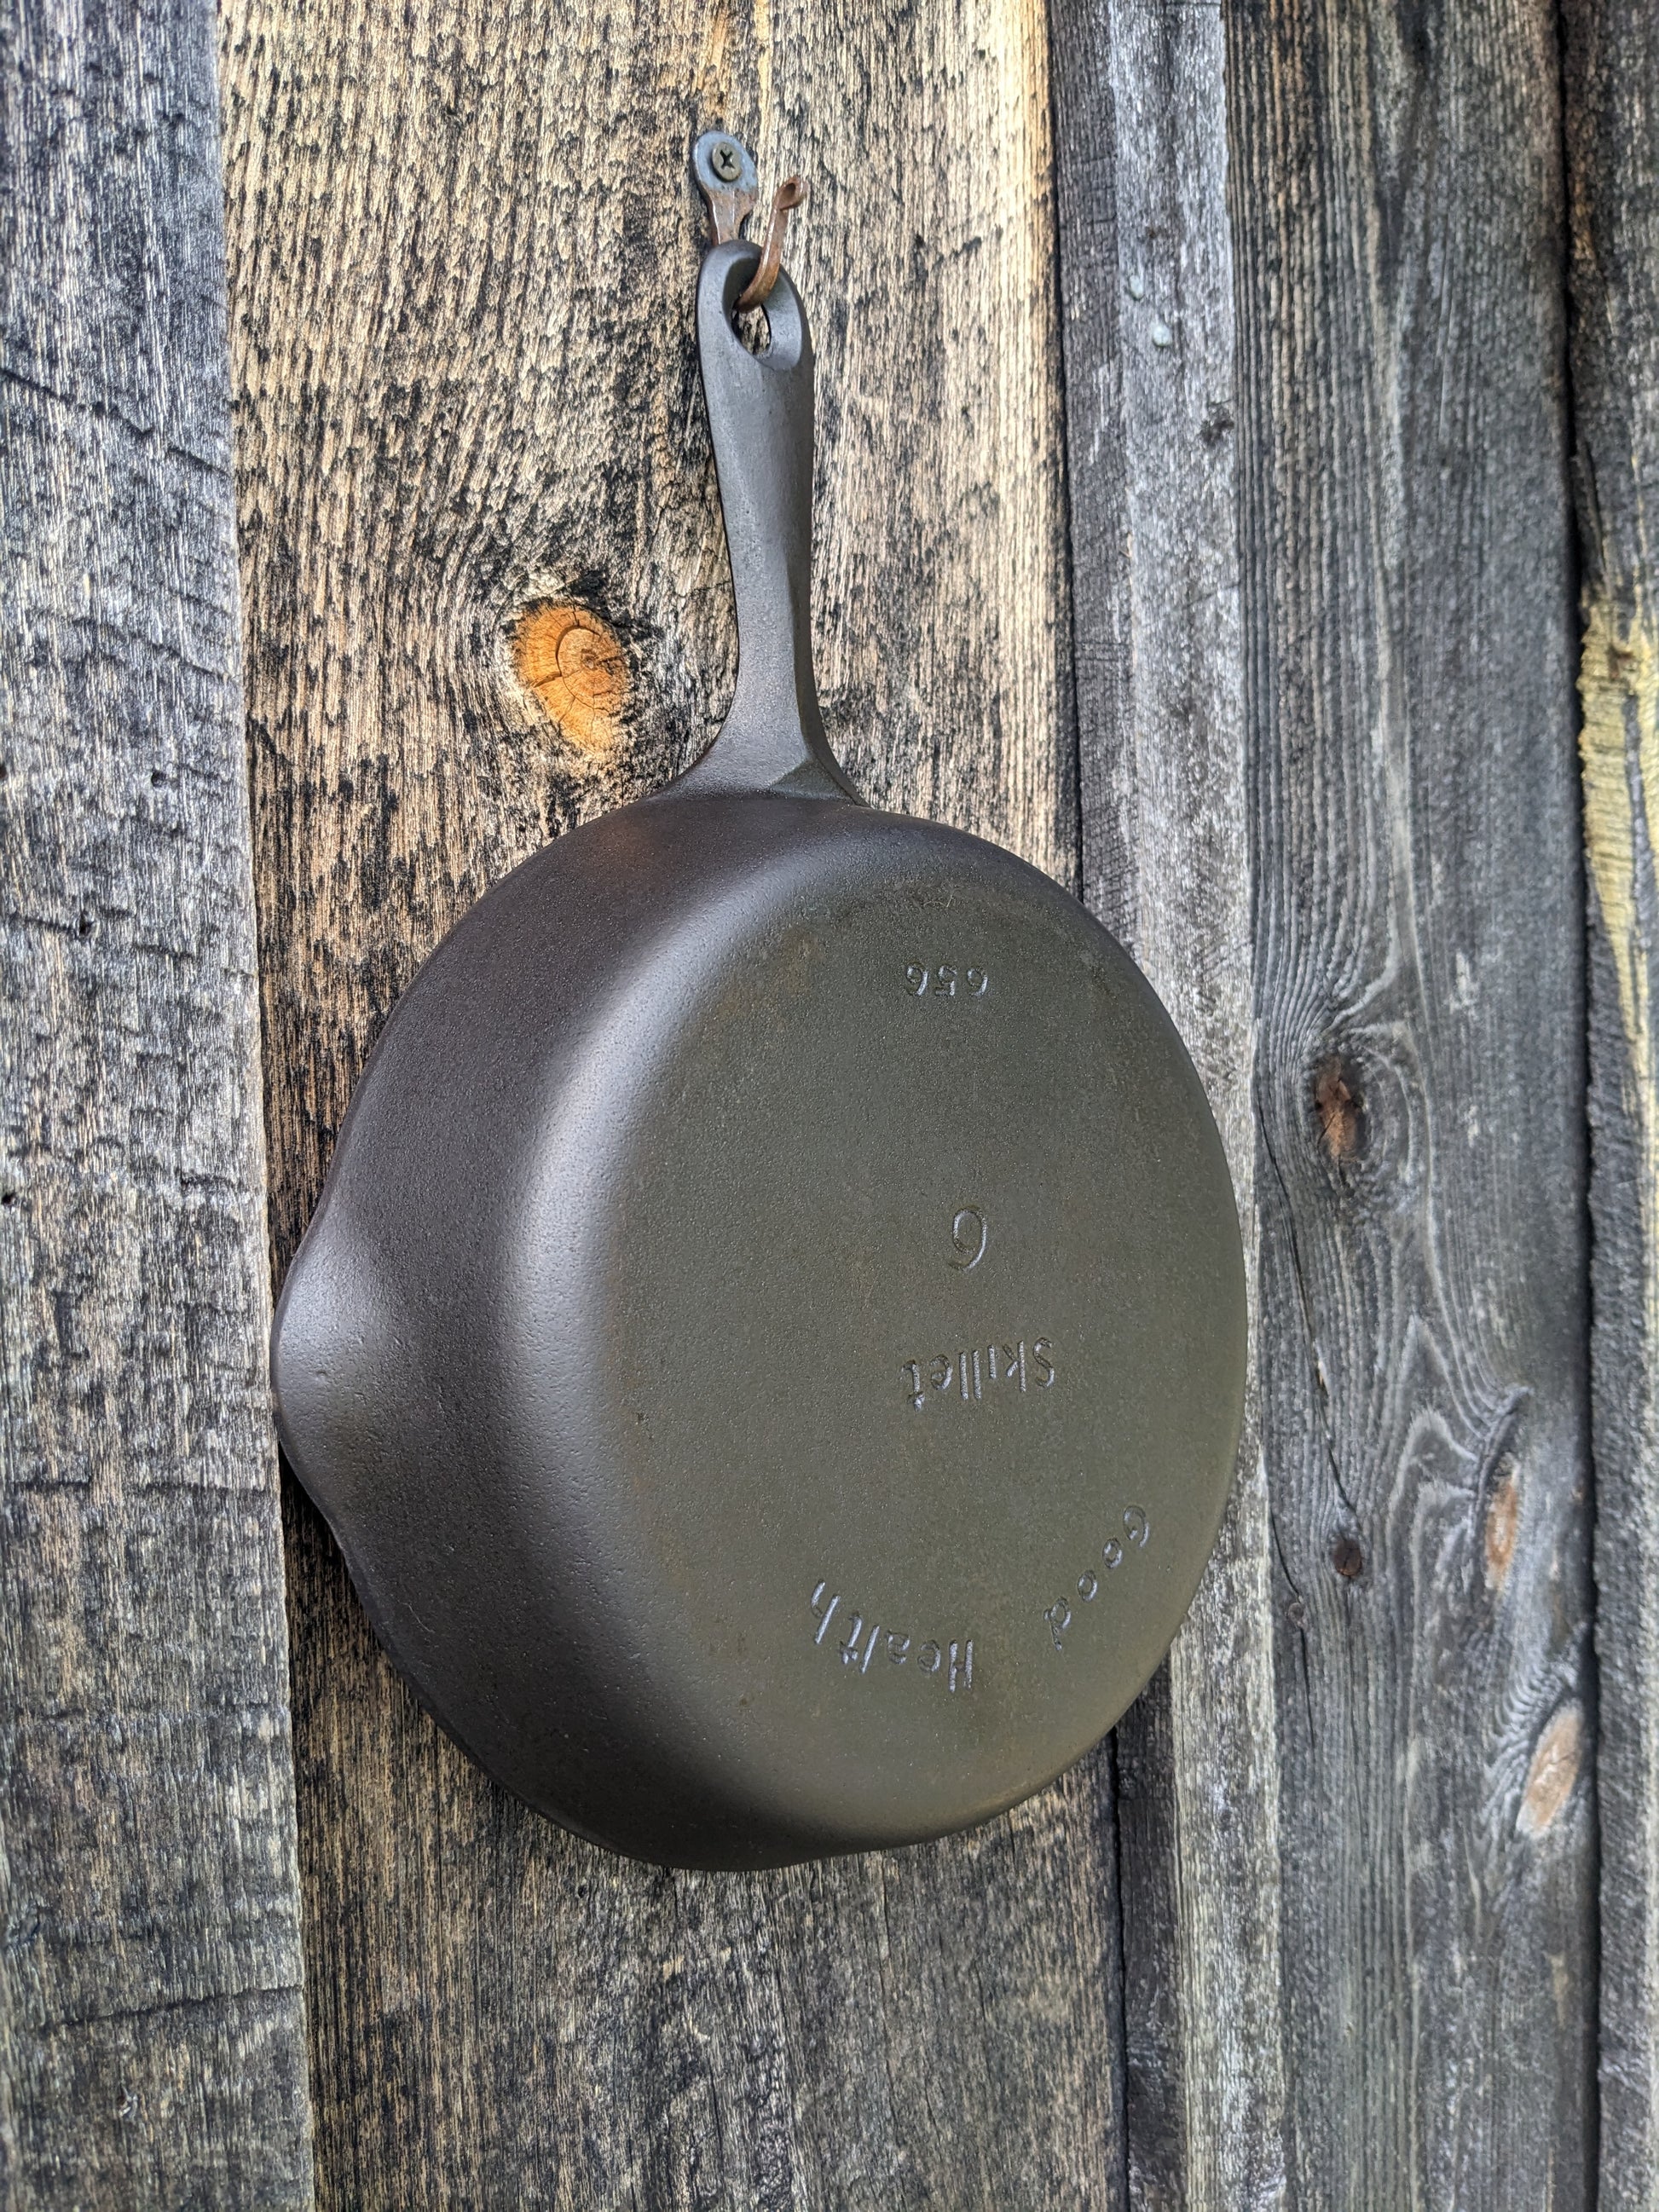 Vintage Cast Iron Skillet Frying Pan Unmarked 6 1/4 Inch made in Taiwan